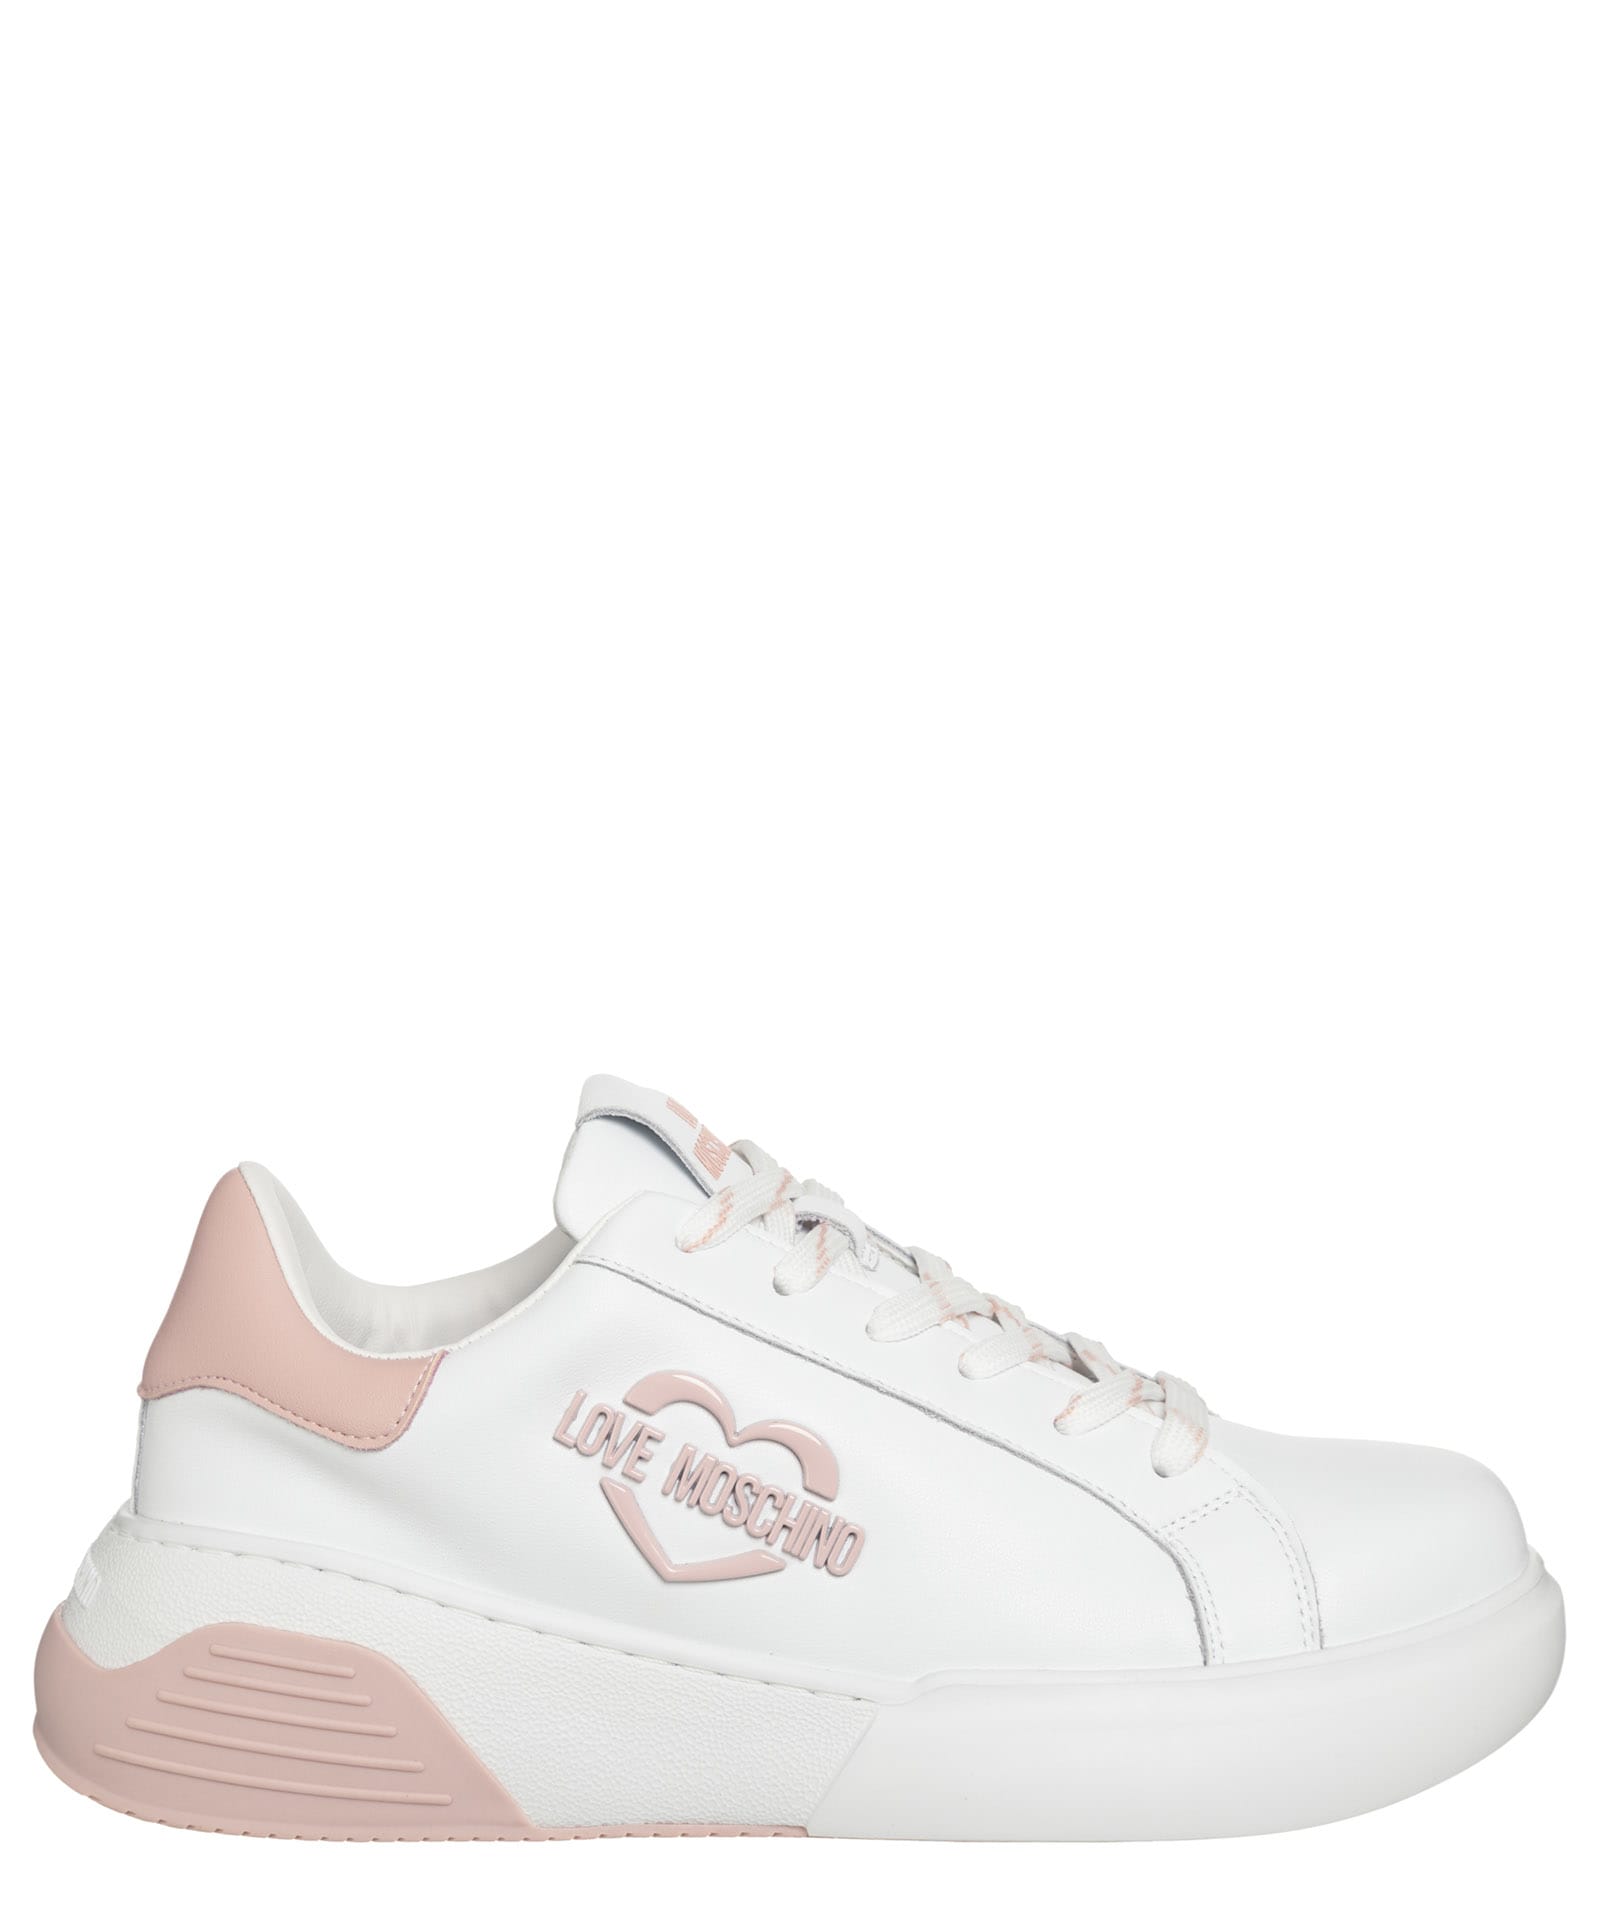 LOVE MOSCHINO LEATHER SNEAKERS